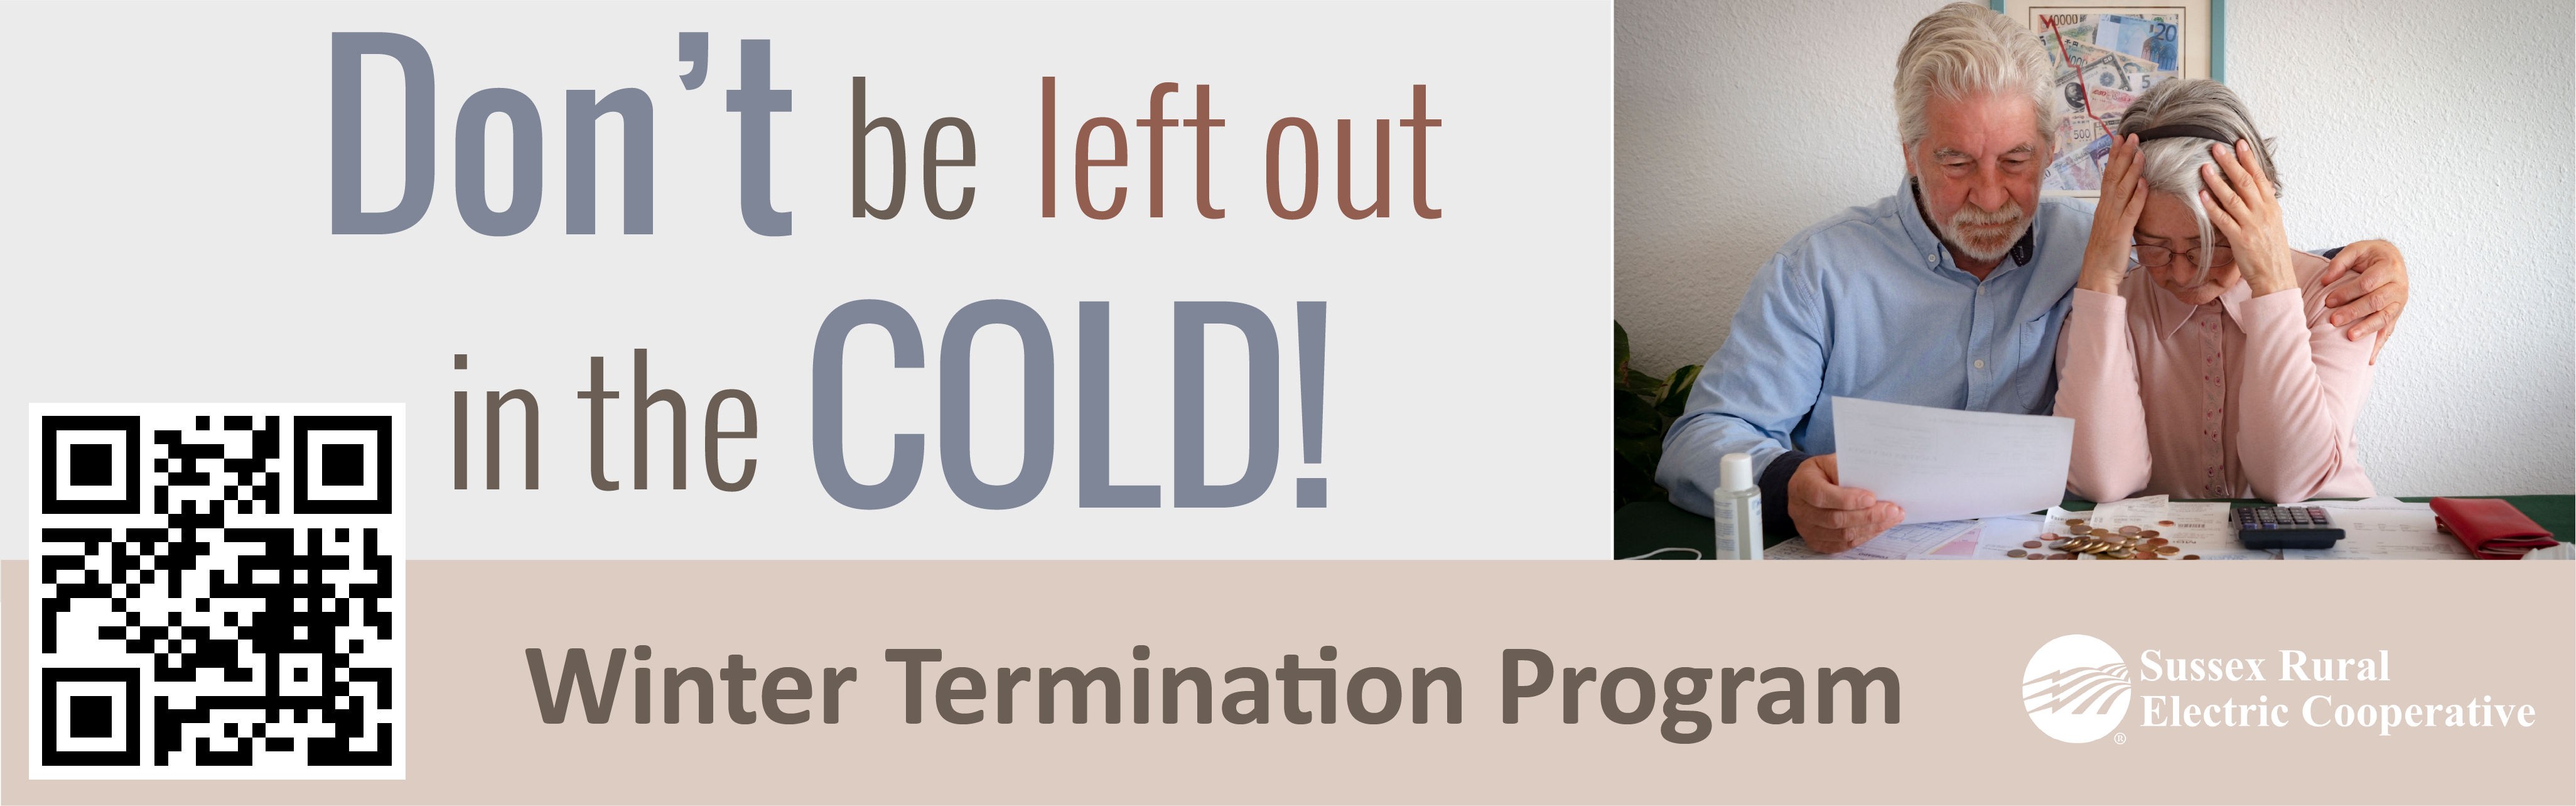 Don't be left out in the COLD! Winter Termination Program